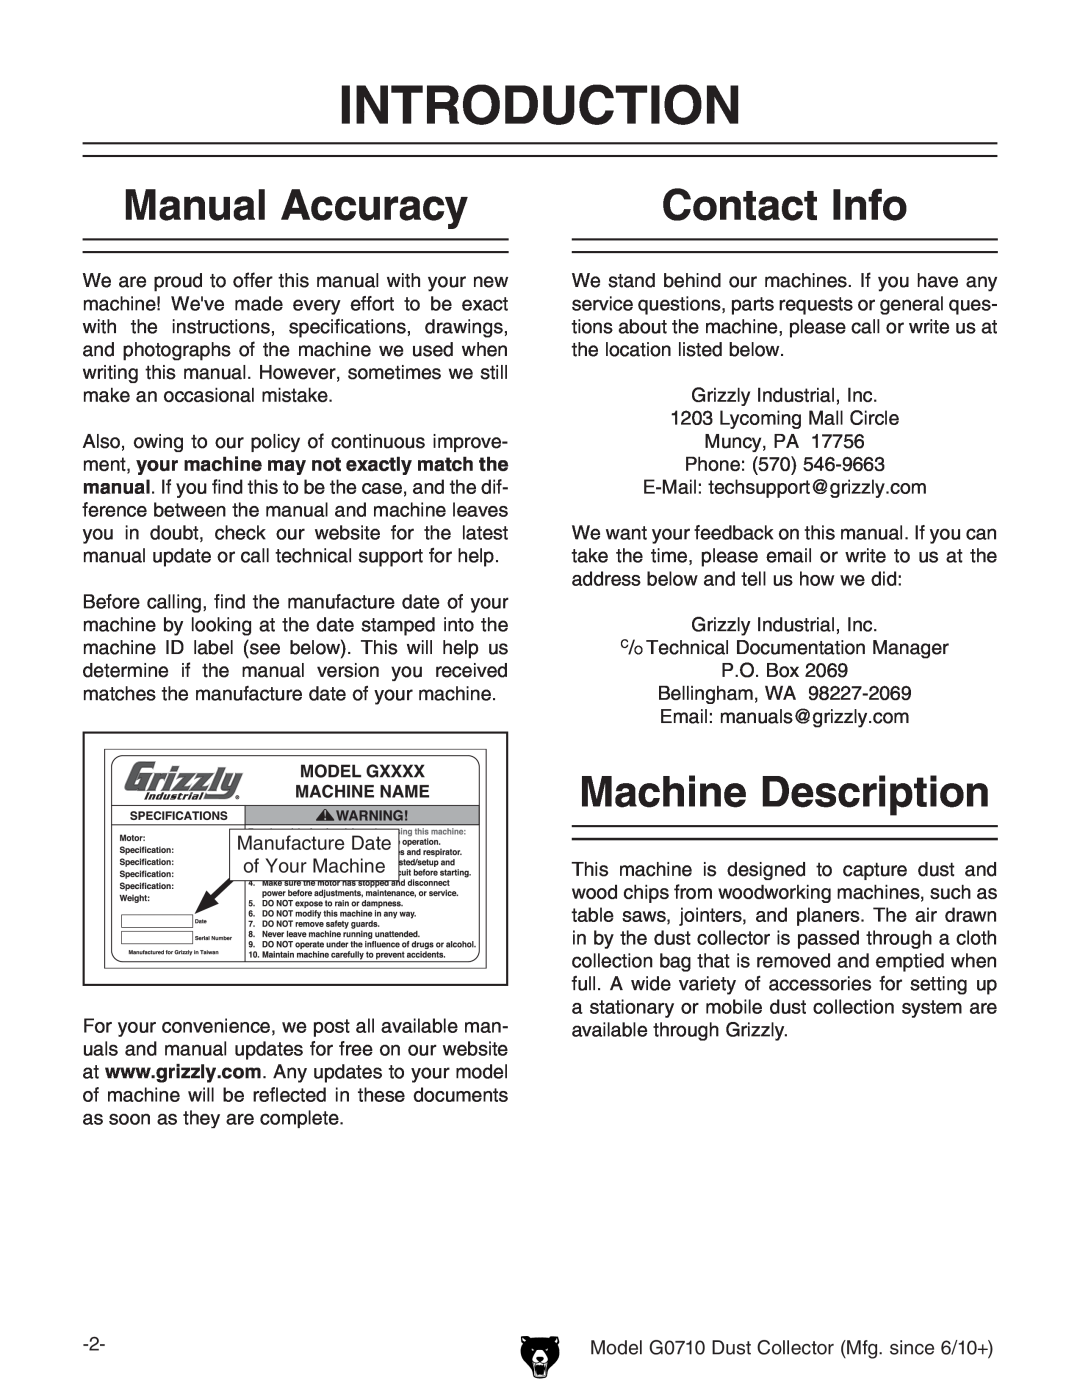 Grizzly G0710 owner manual Introduction, Manual Accuracy, Contact Info, Machine Description 